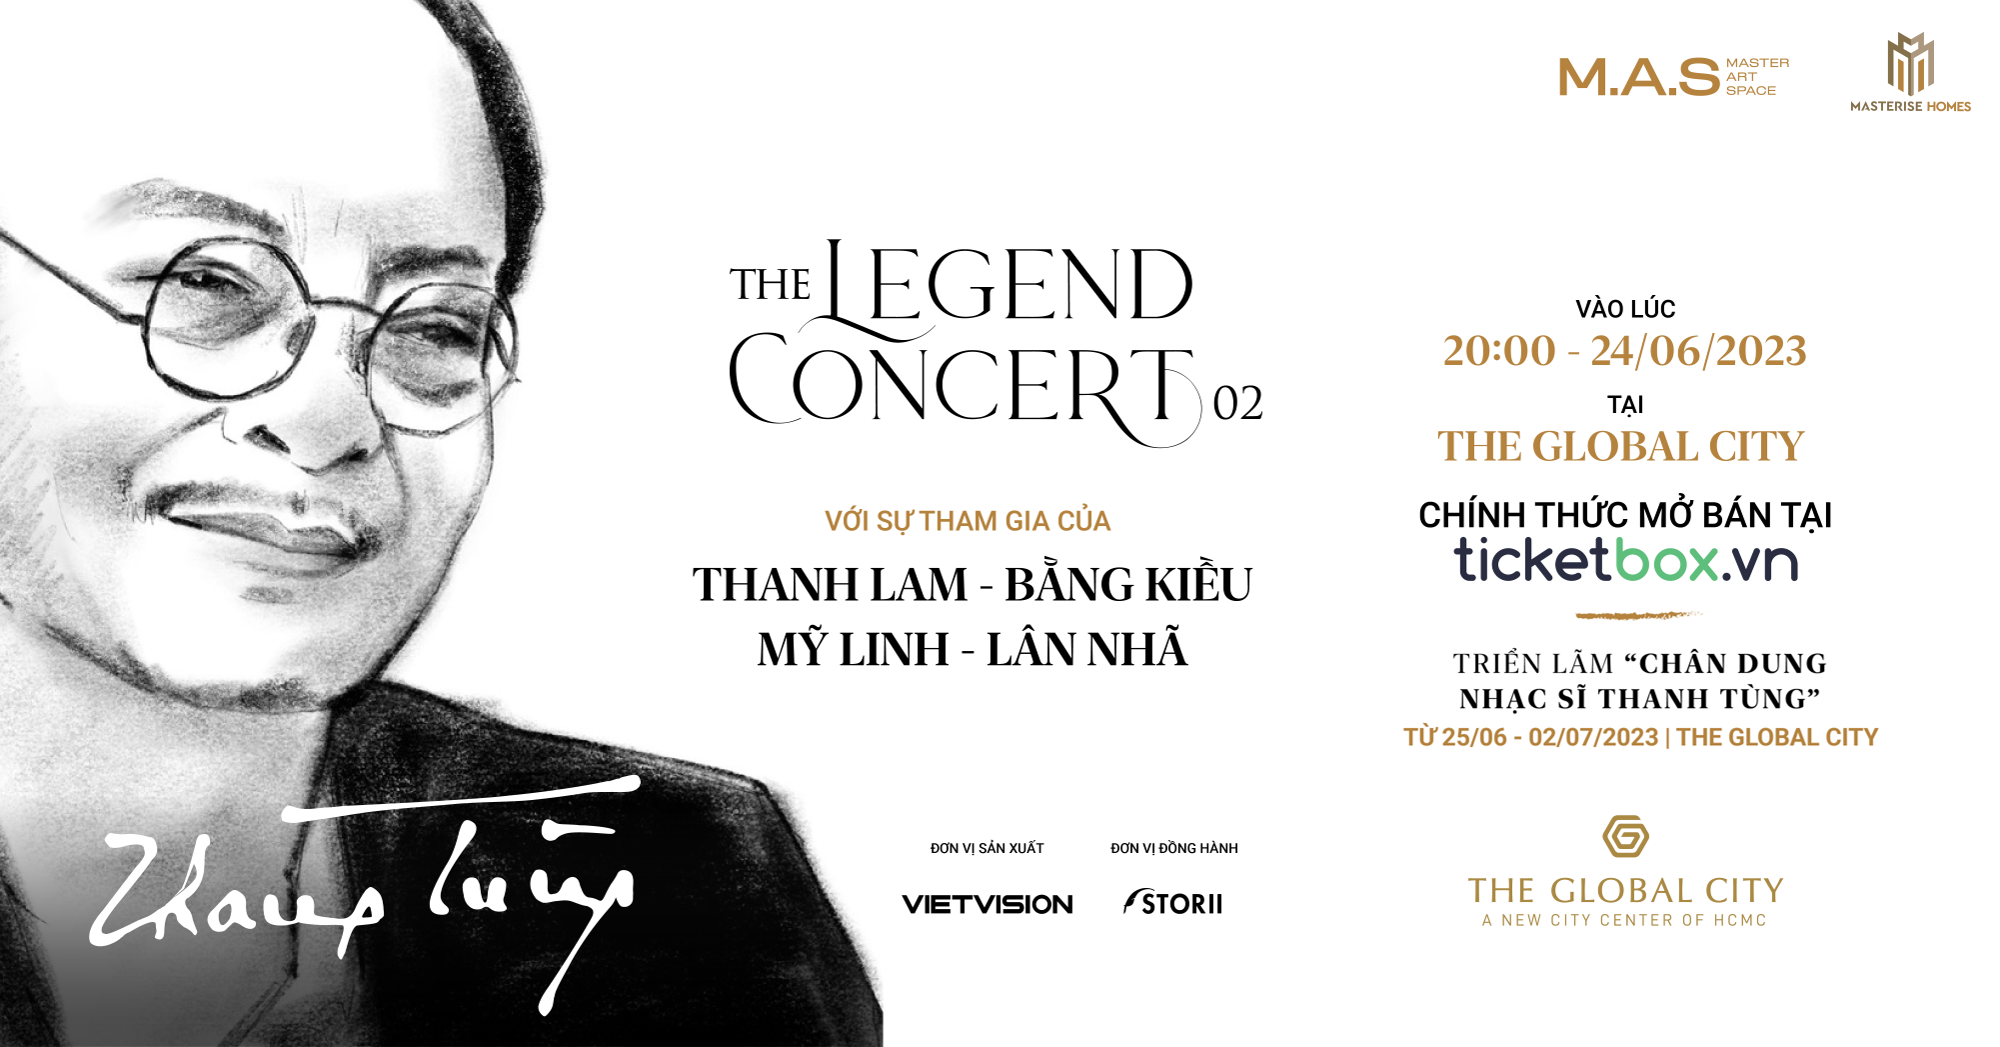 the-legend-concert-02-nhac-si-thanh-tung-1686021440.png